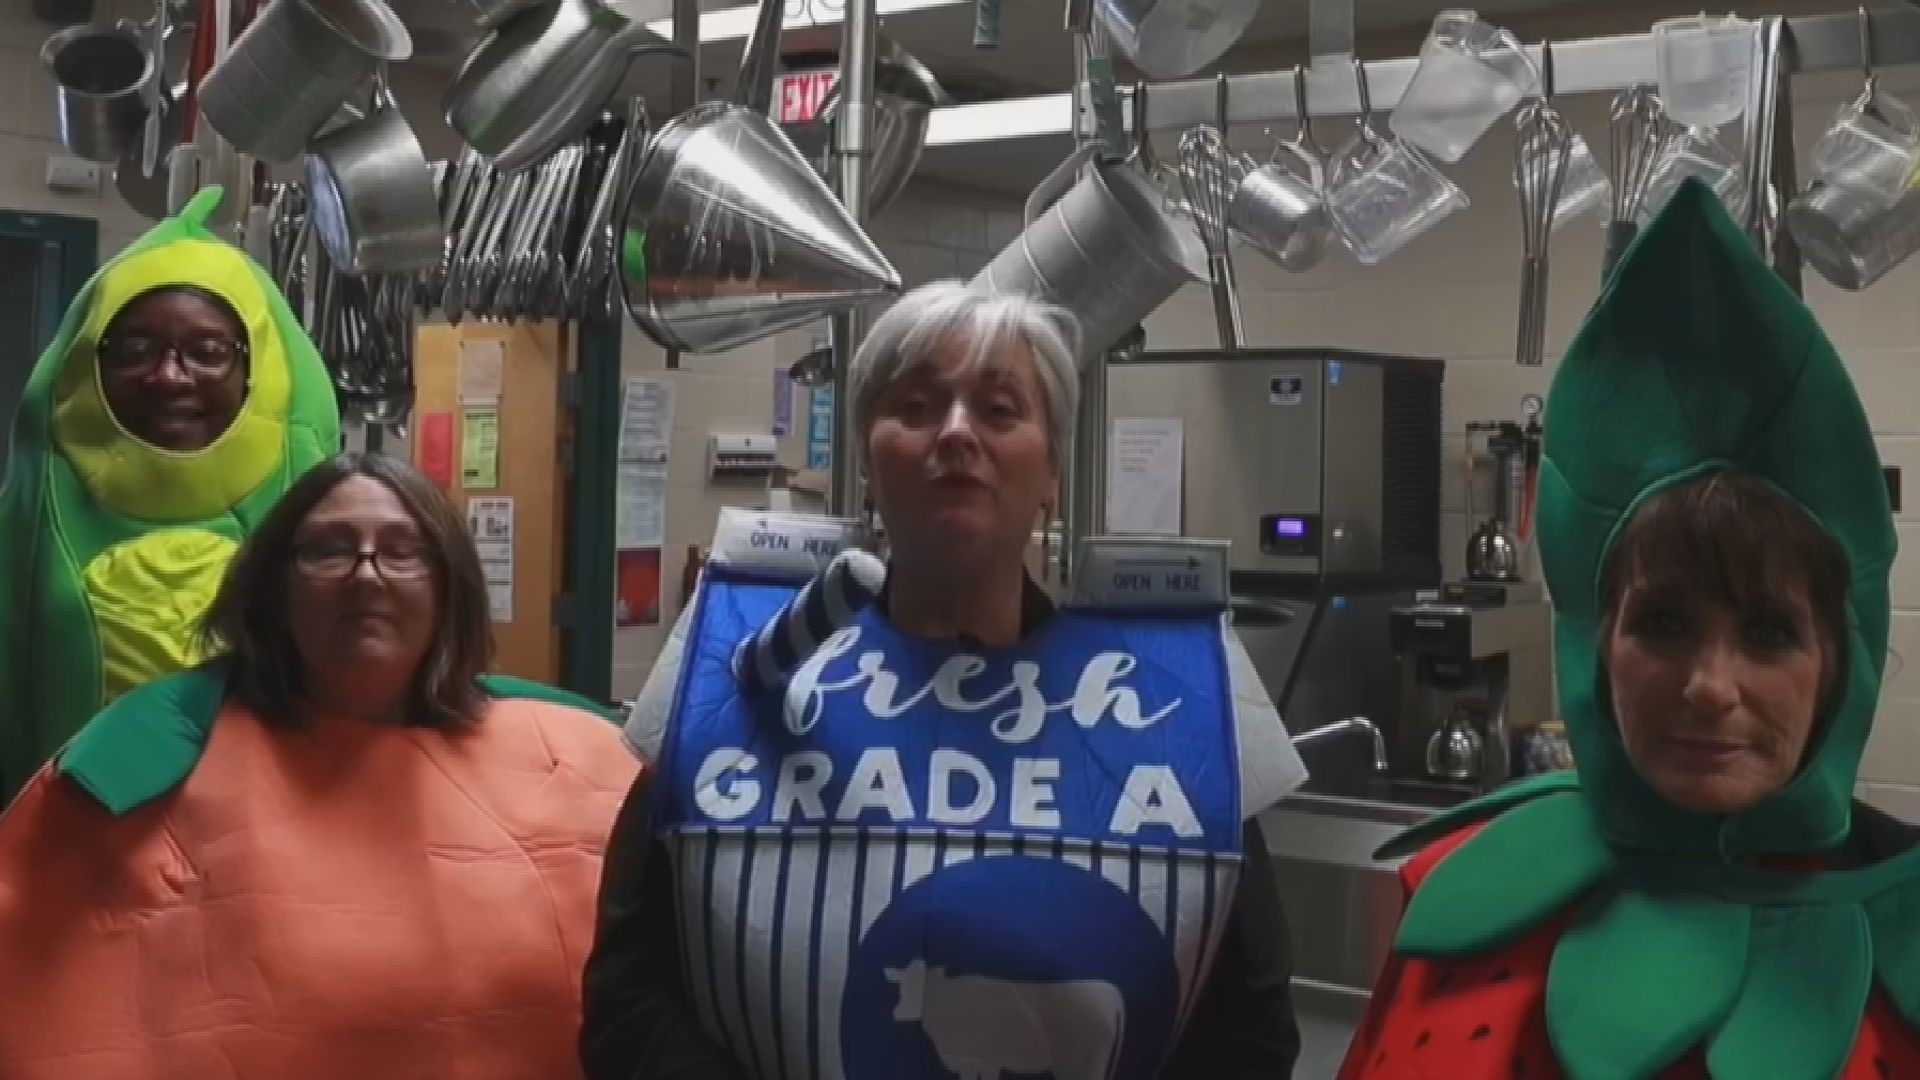 Cafeteria staff dressed up as fruits and vegetables for videos aimed at encouraging kids to read